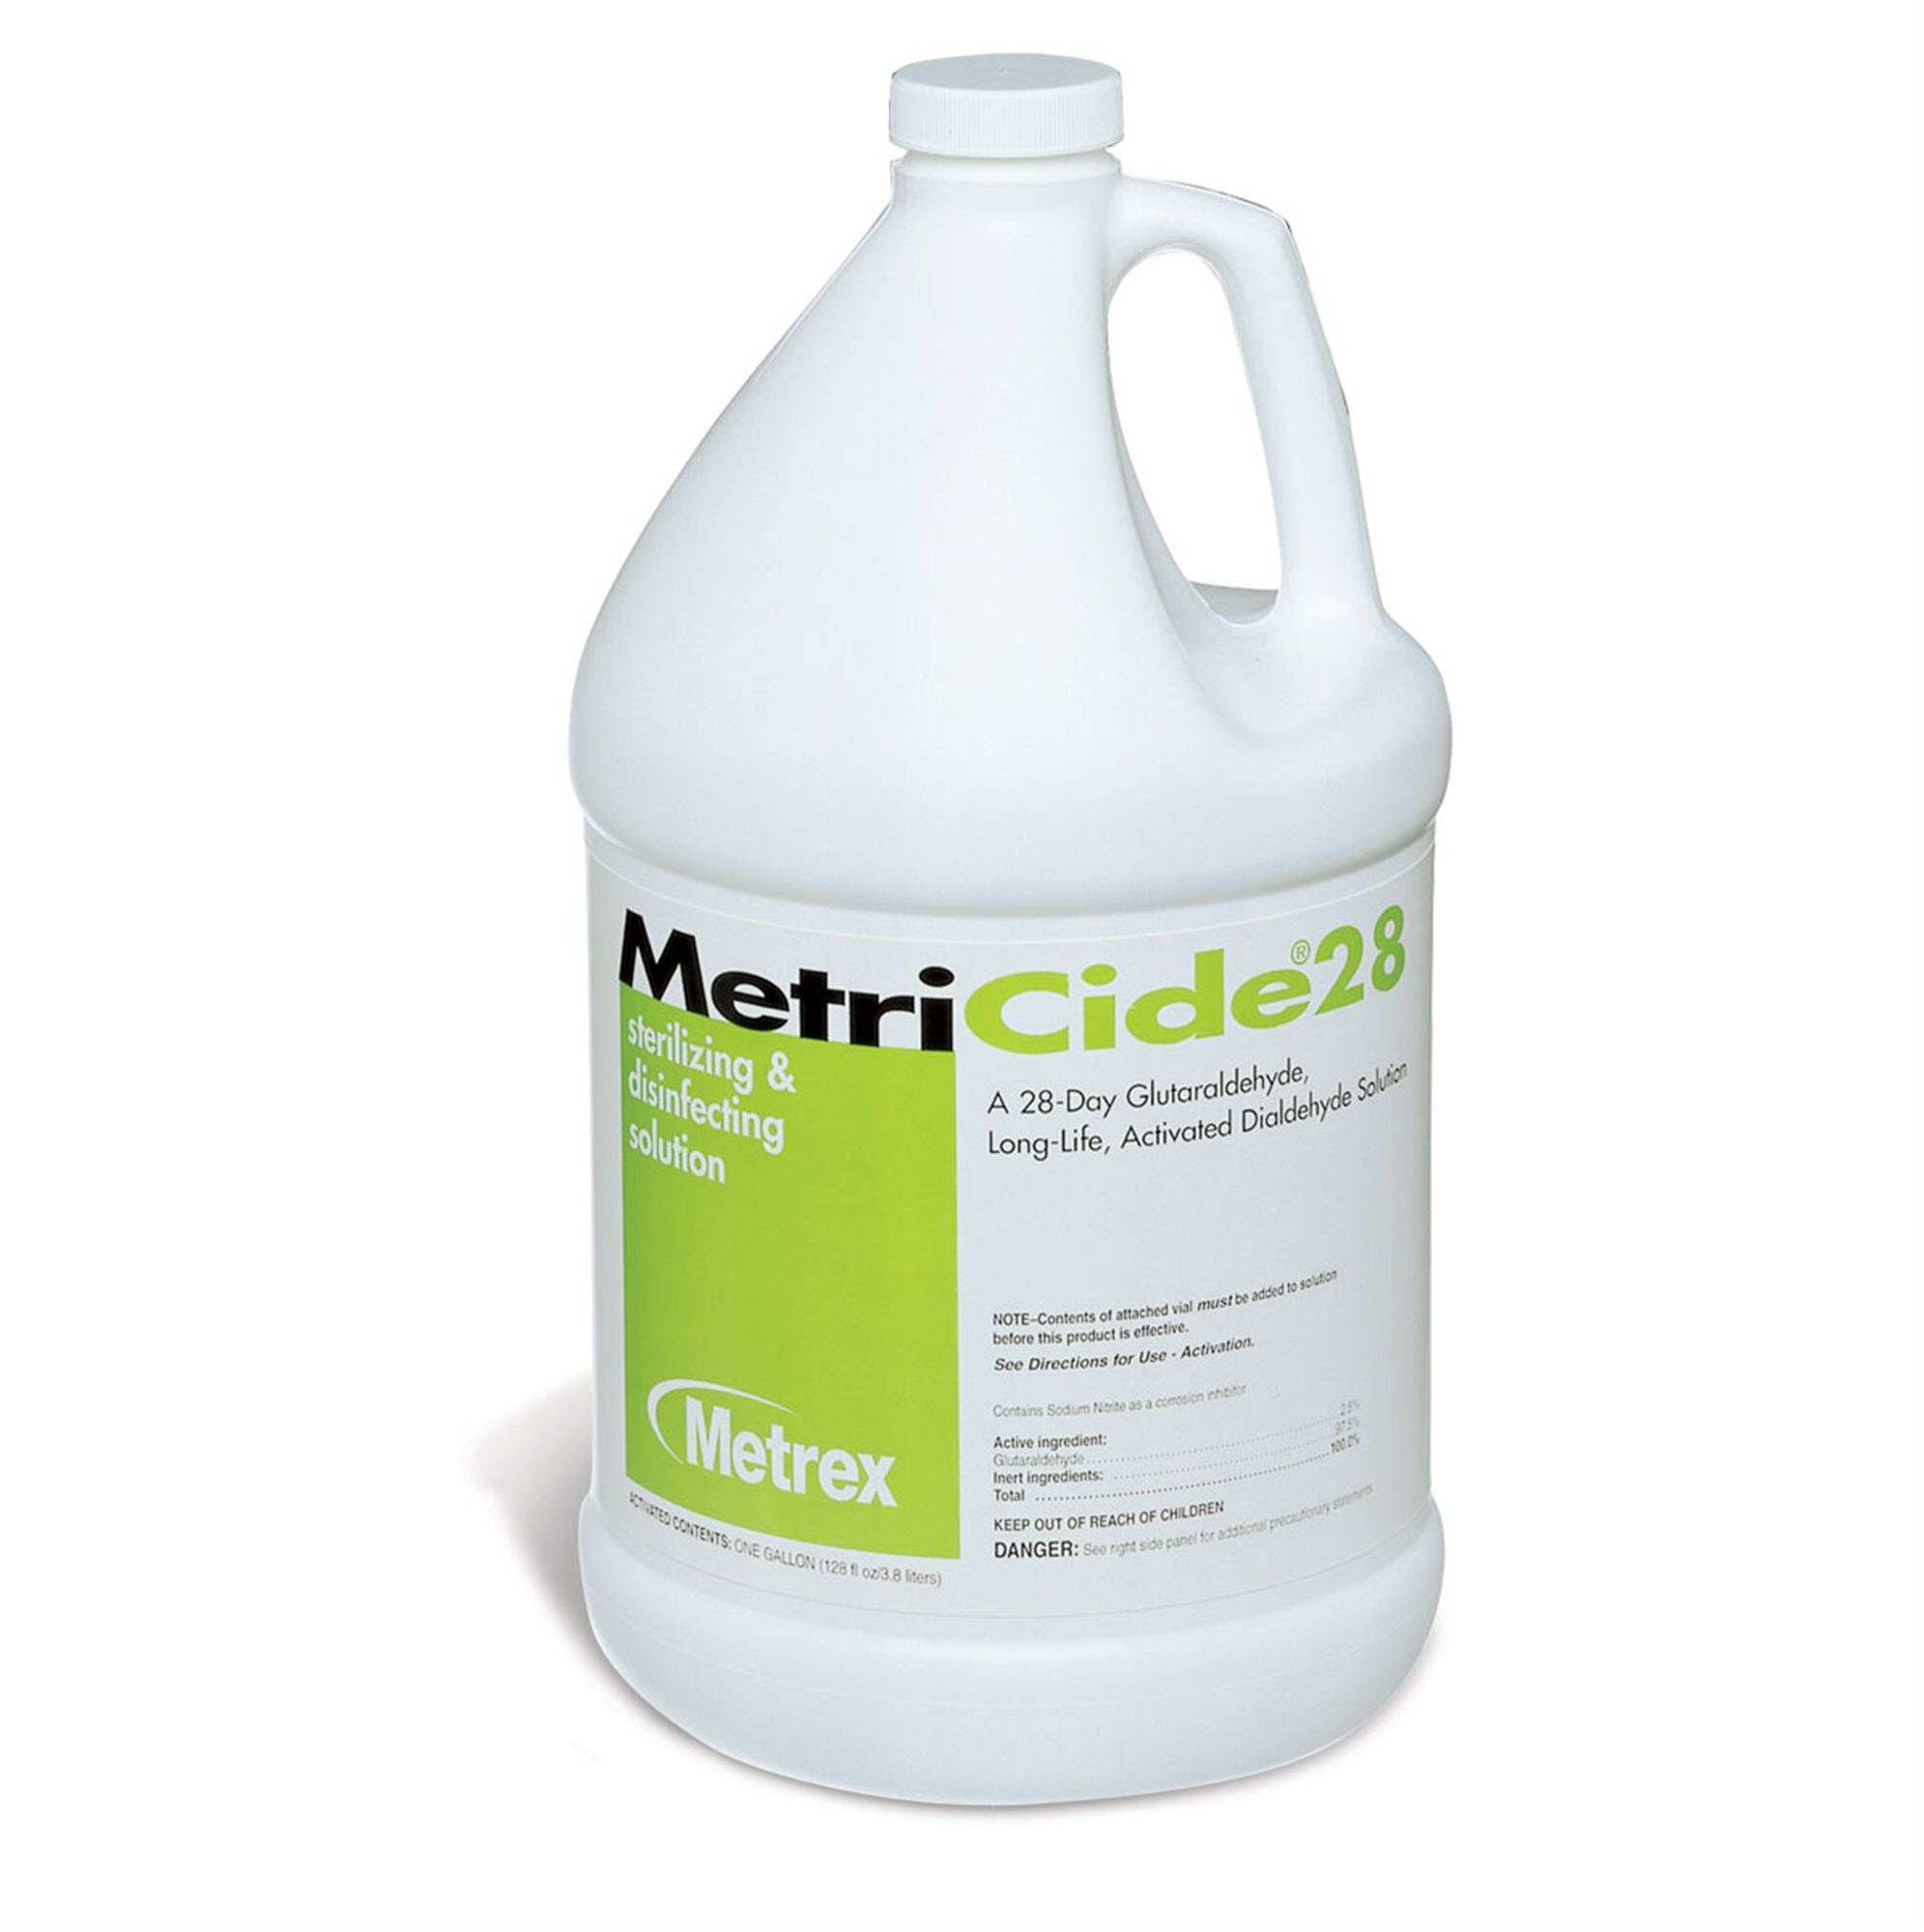 Sterilizing and Disinfecting Solution - MetriCide® 28